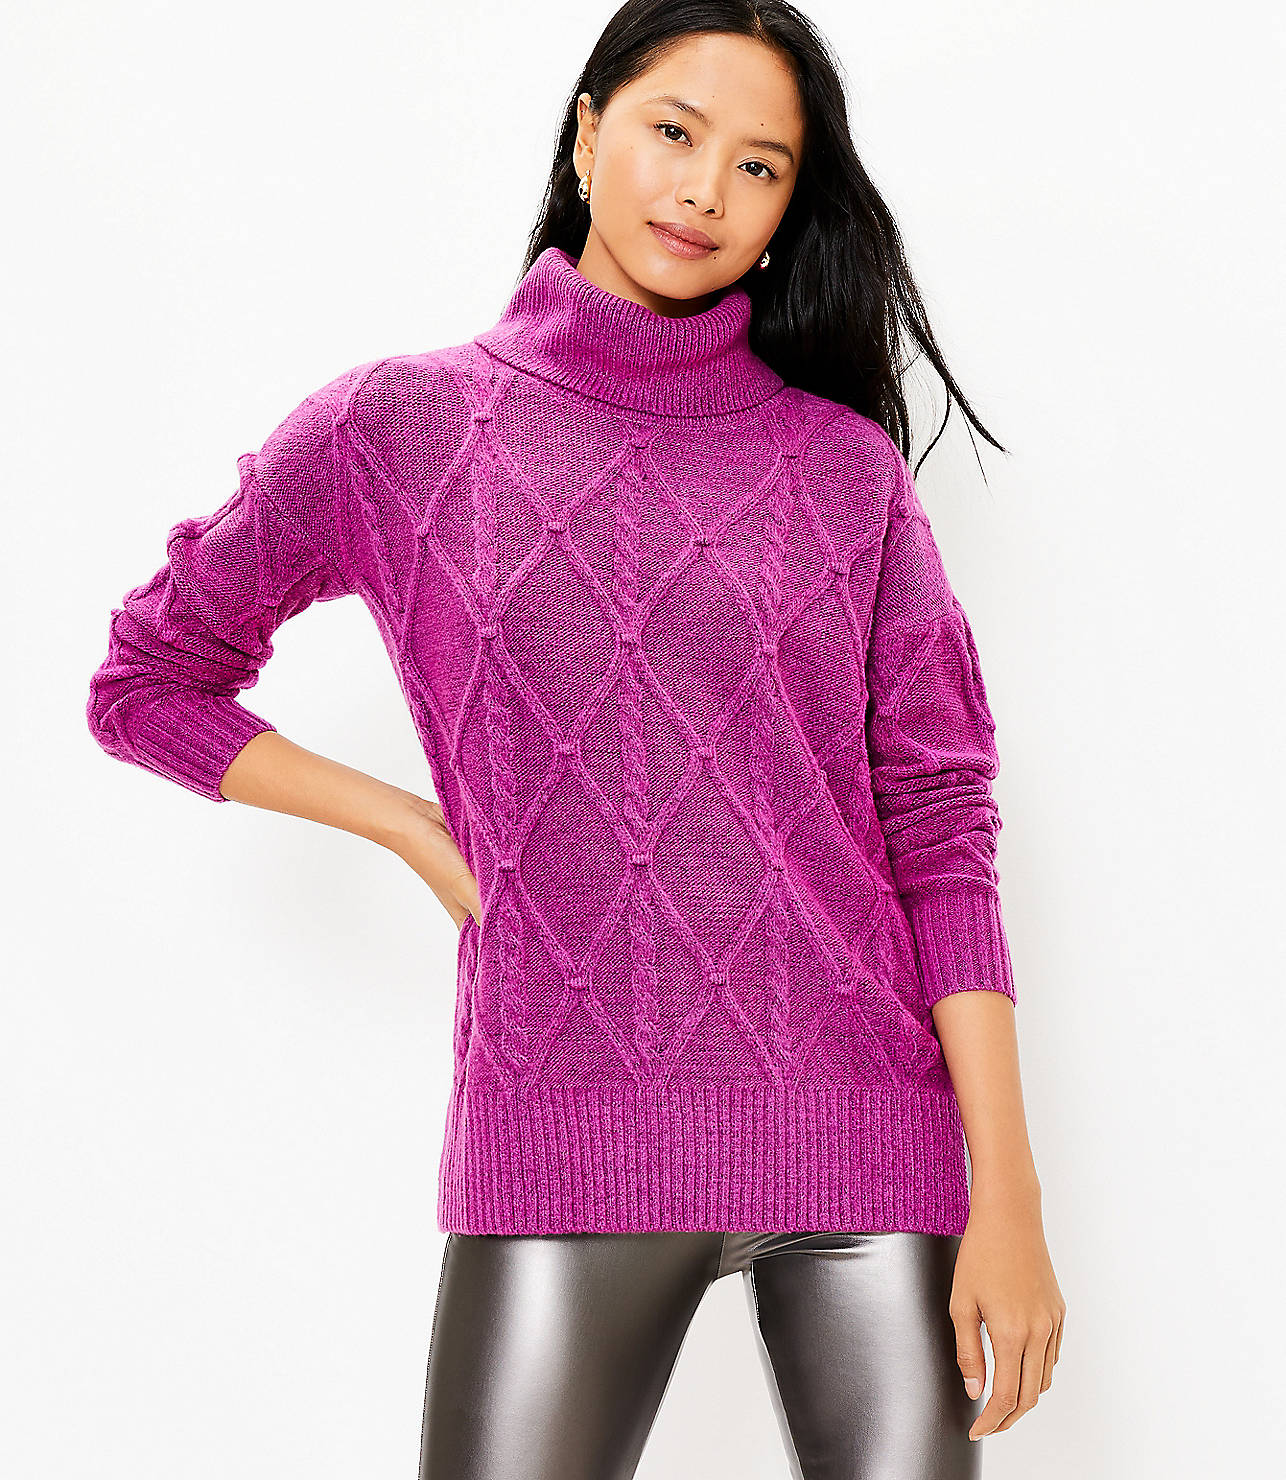 Cable Turtleneck Tunic Sweater